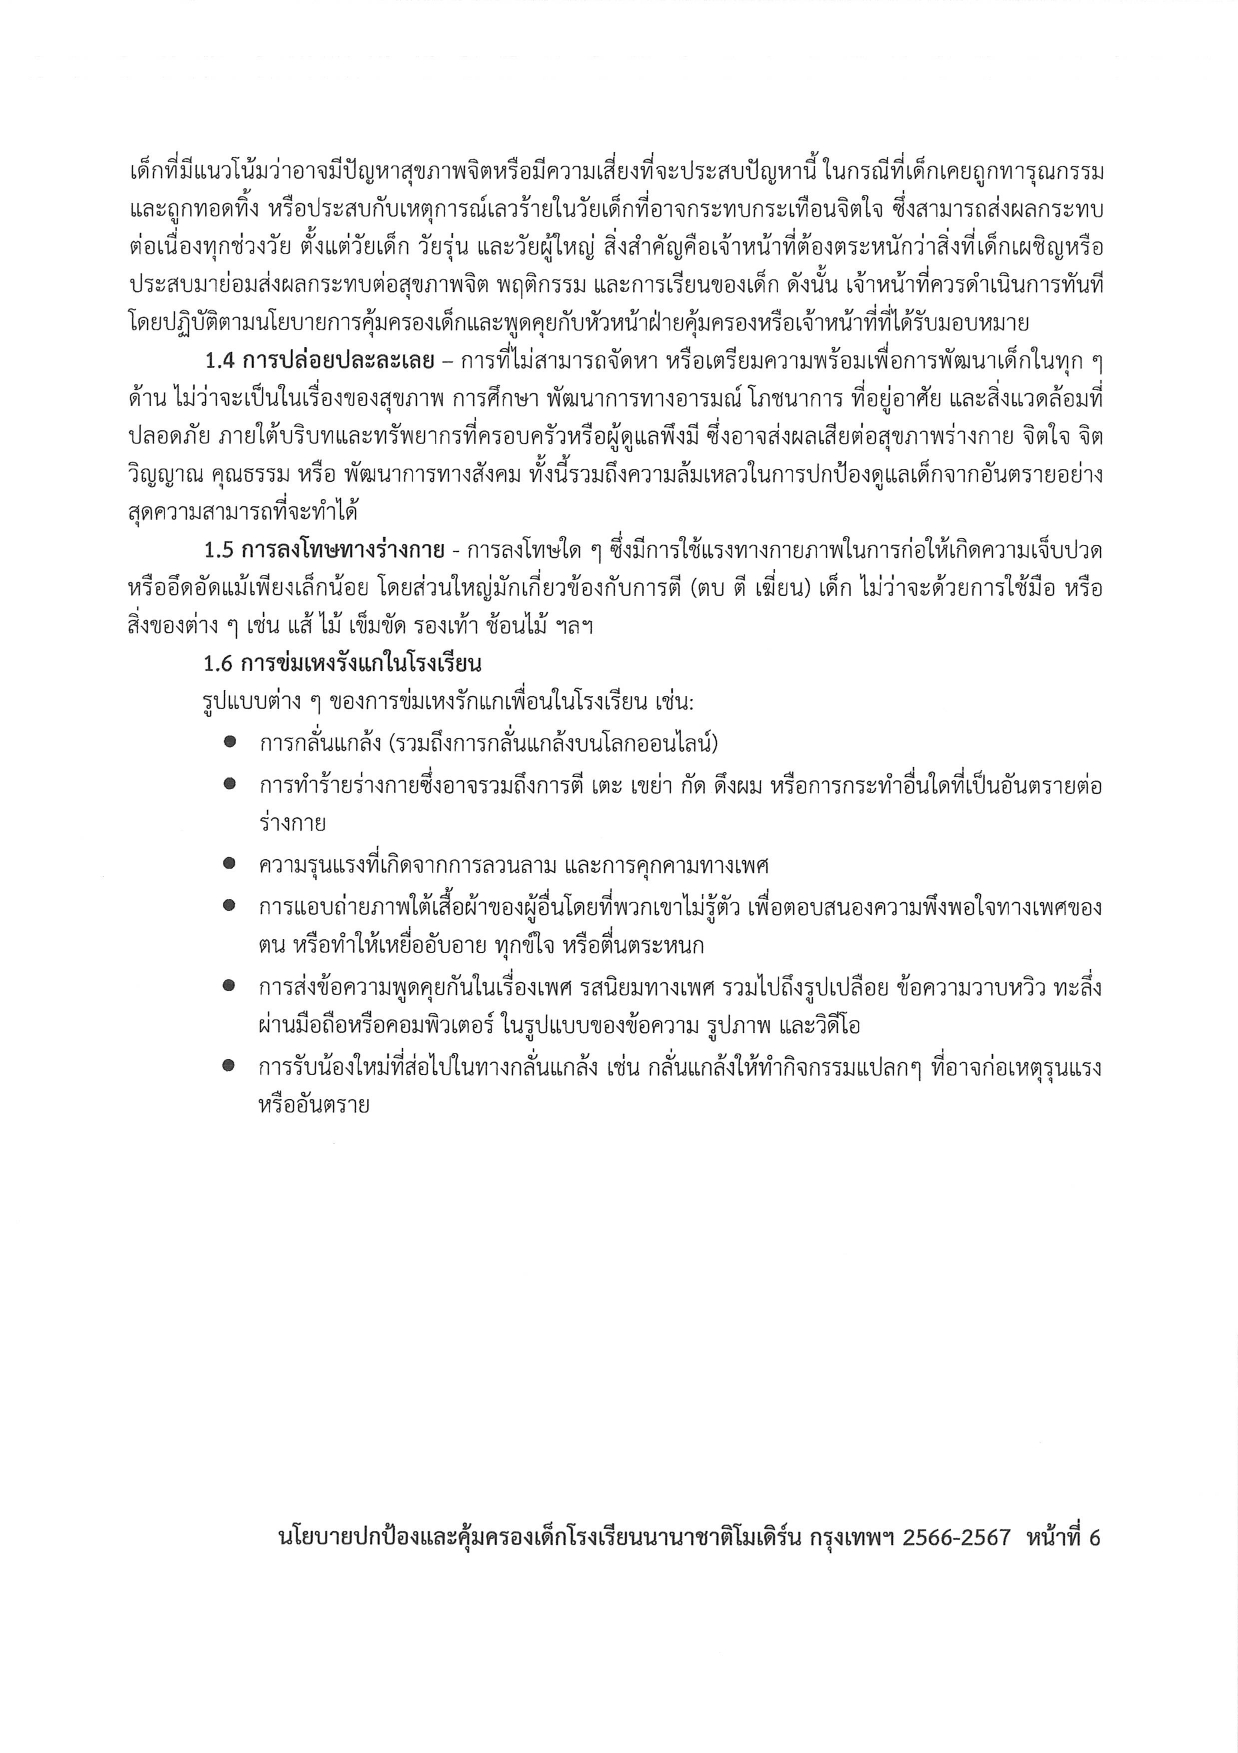 Child Protection Policy 2023 2024 Thai page 0006